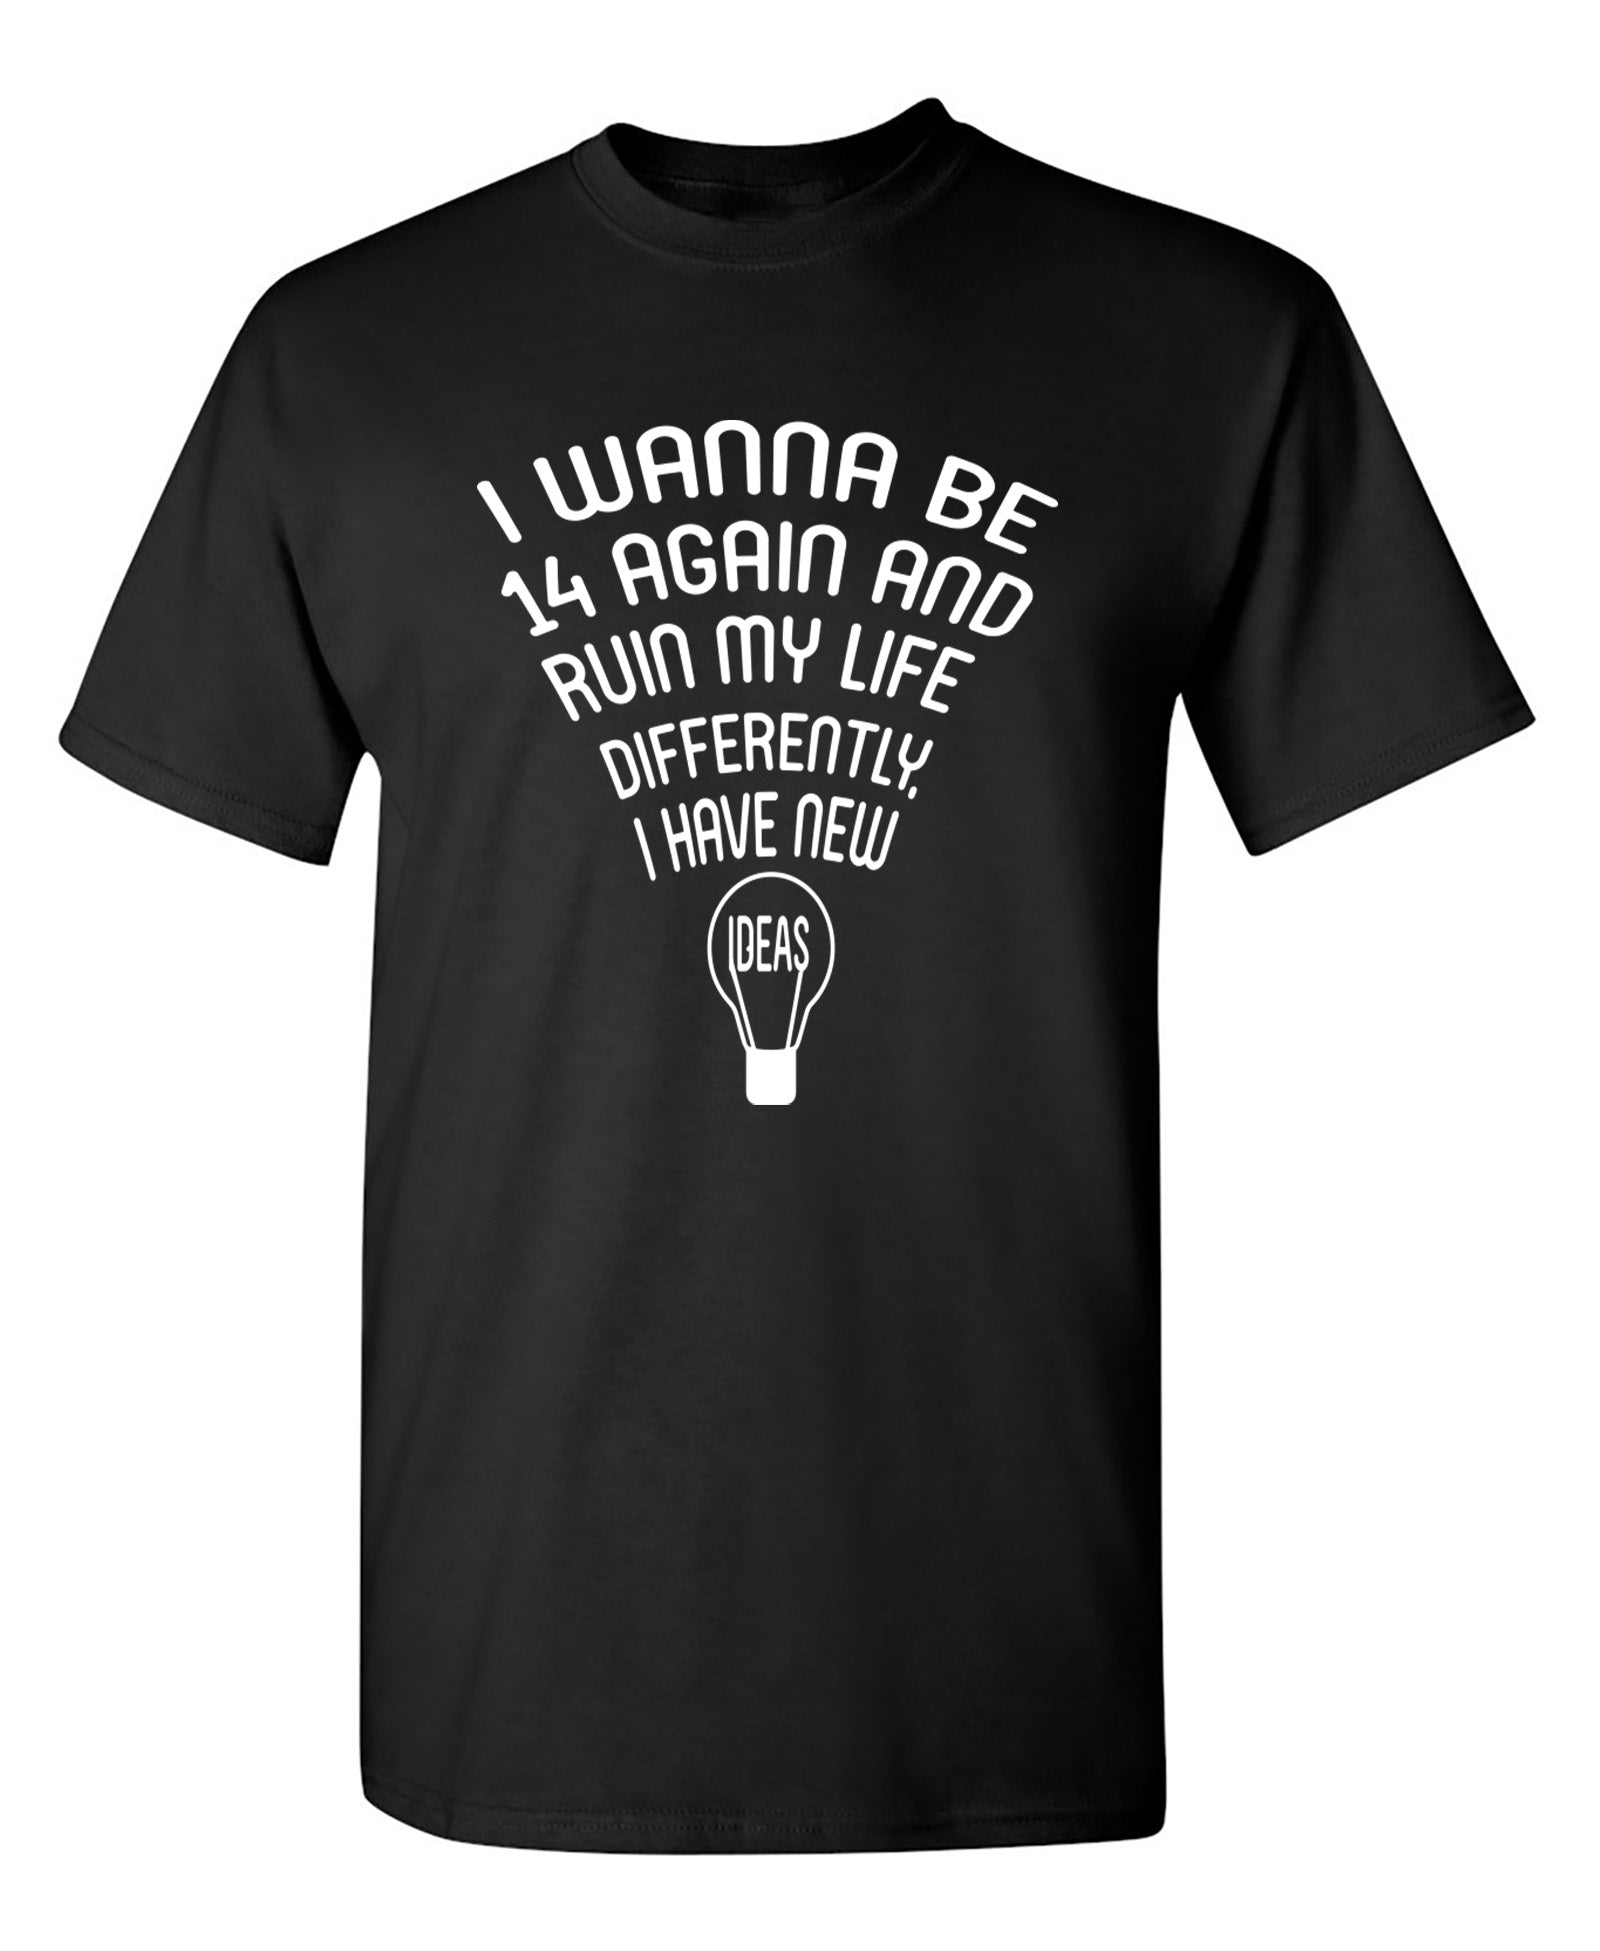 I wanna Be 14 Again - Funny T Shirts & Graphic Tees